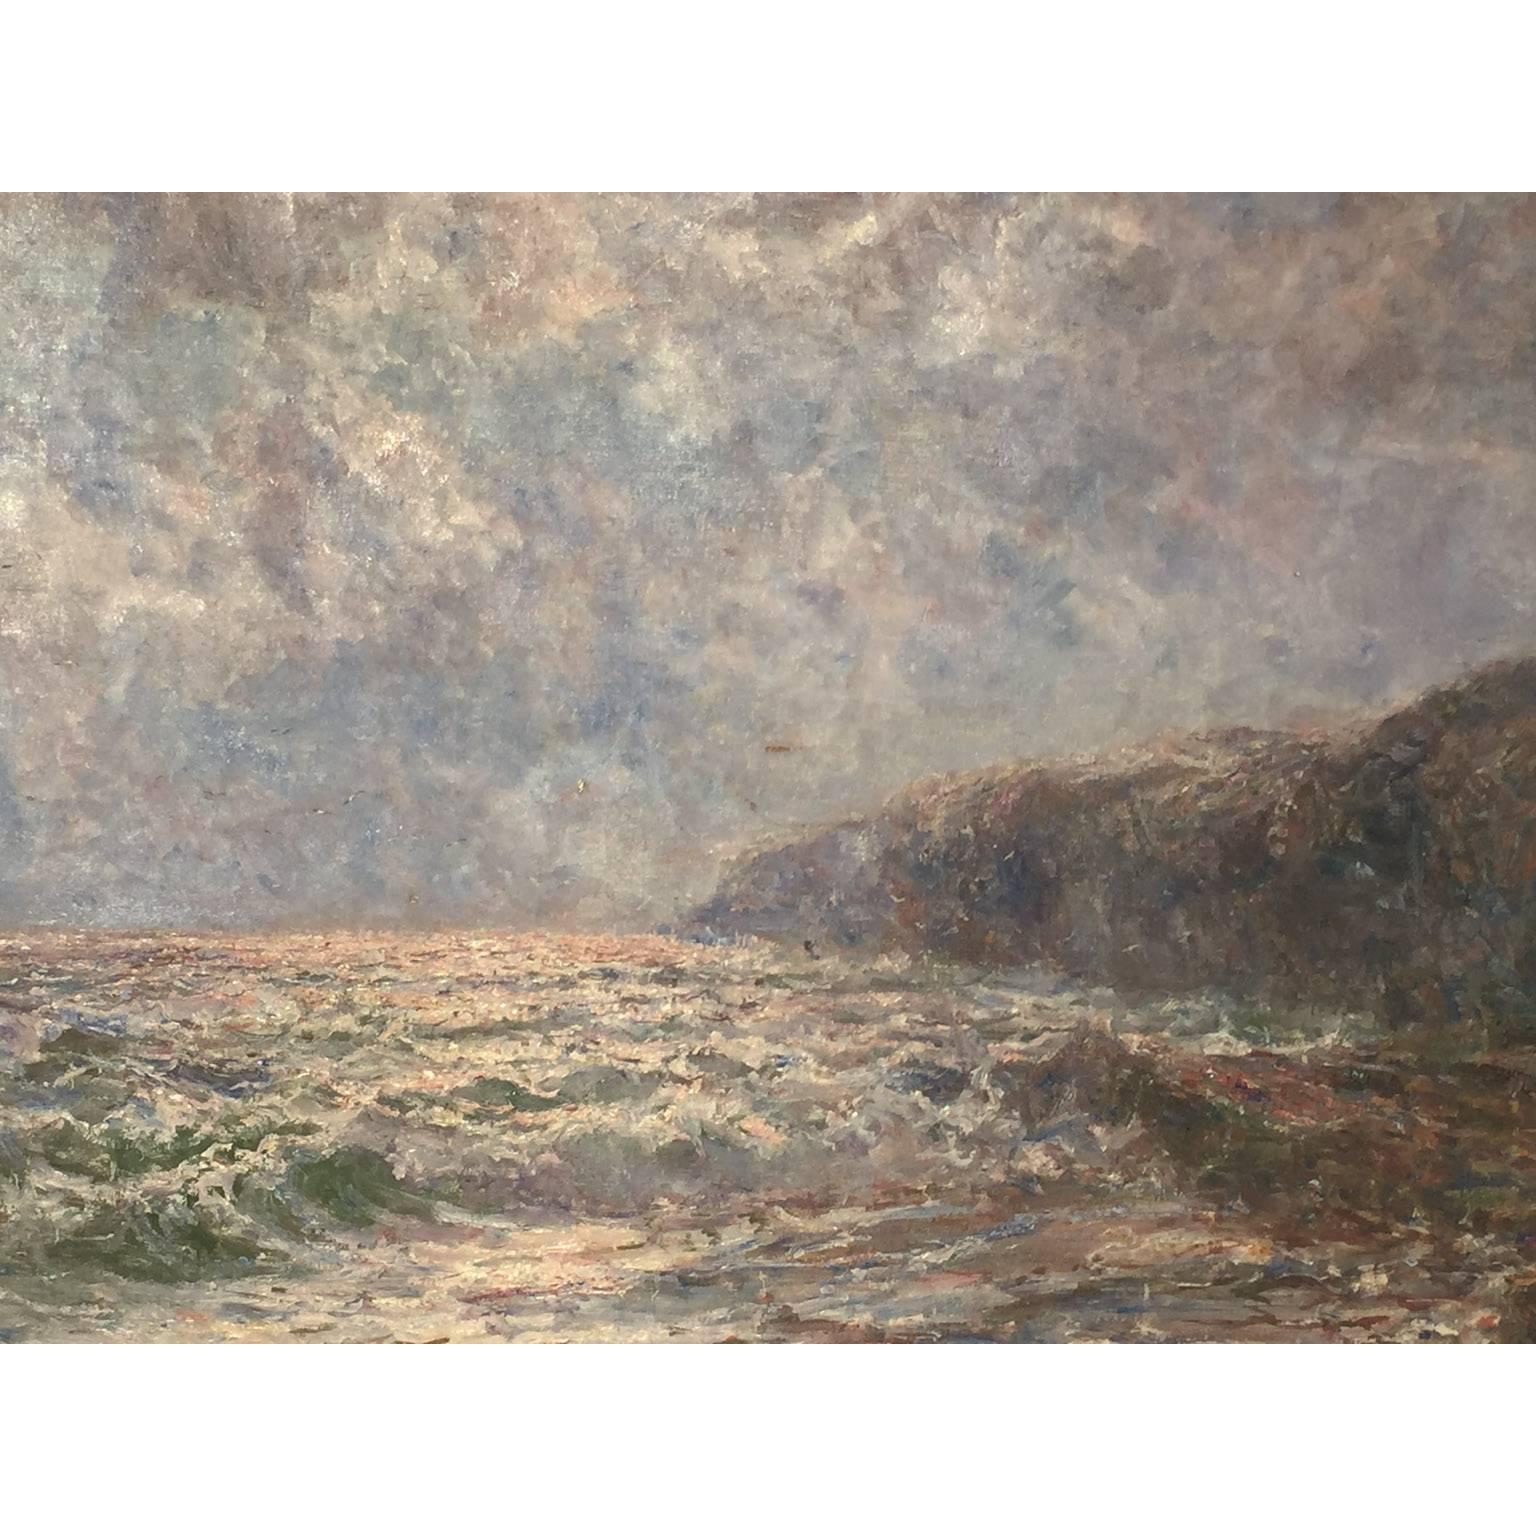 John Falconer Slater (British, 1857-1937) Large Oil on Canvas "Rough Coastal Seascape" depicting a marine British coastal scene on a cloudy day with rough a seas. Signed: Slater (Lower left) within an ornate giltwood carved frame, circa: